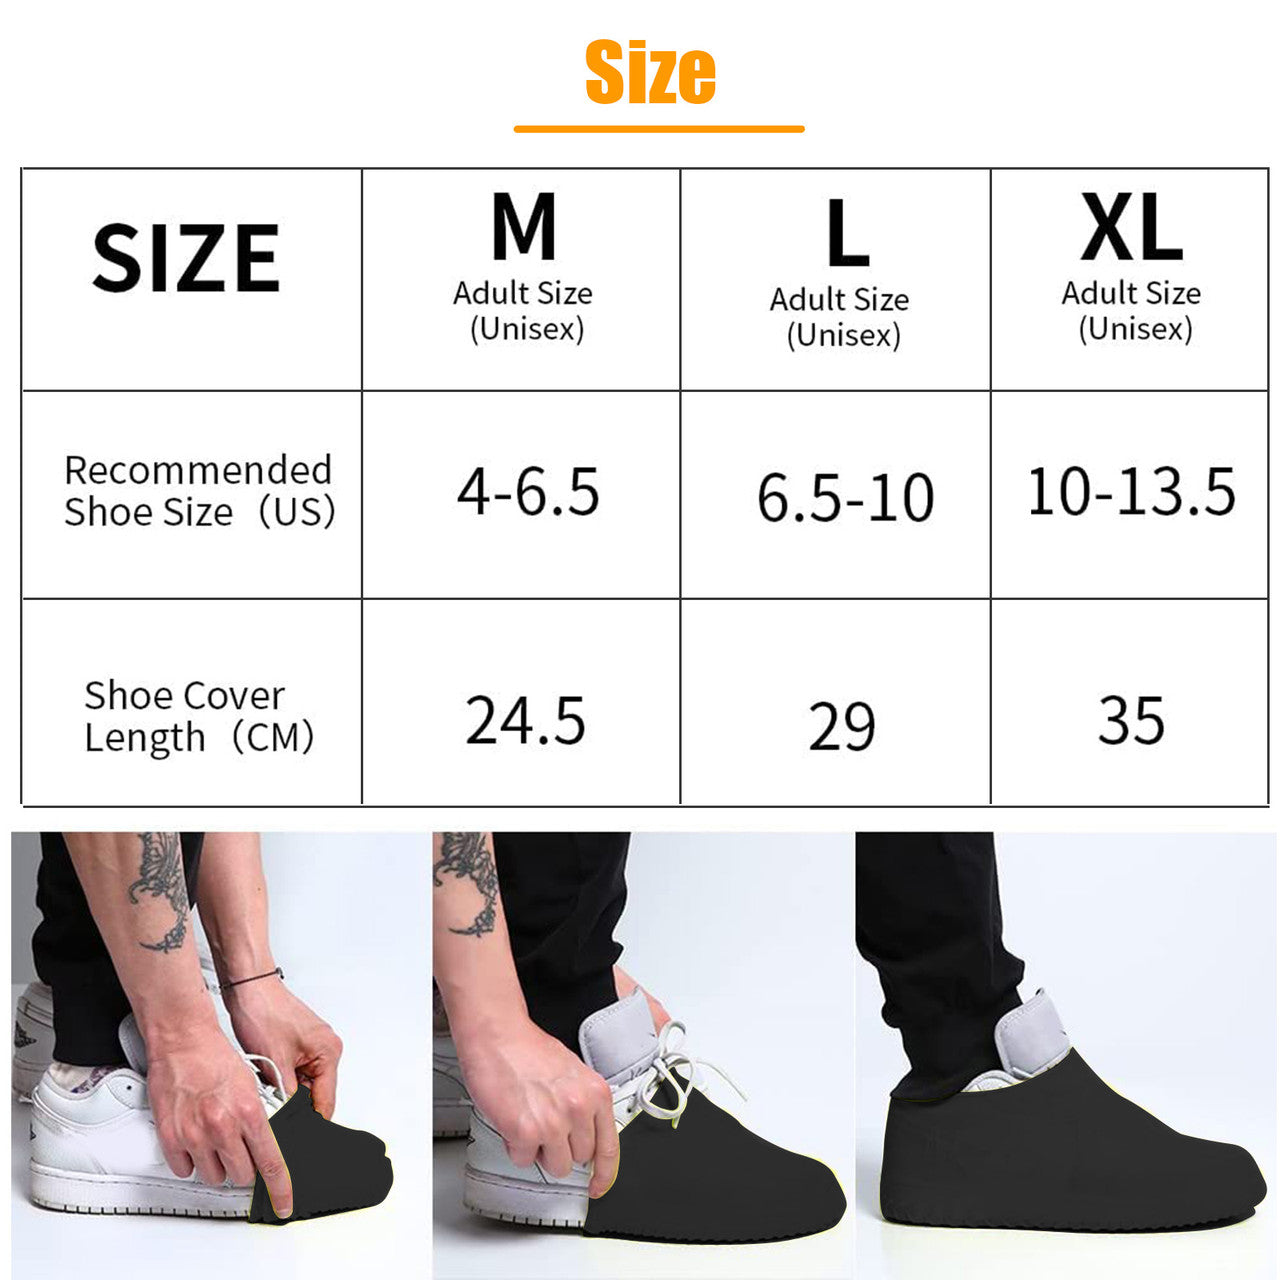 Waterproof Silicone Rain Shoe Cover - Non Slip,Water Resistant,Reusable,Stretchable,Foldable Size M (Black)